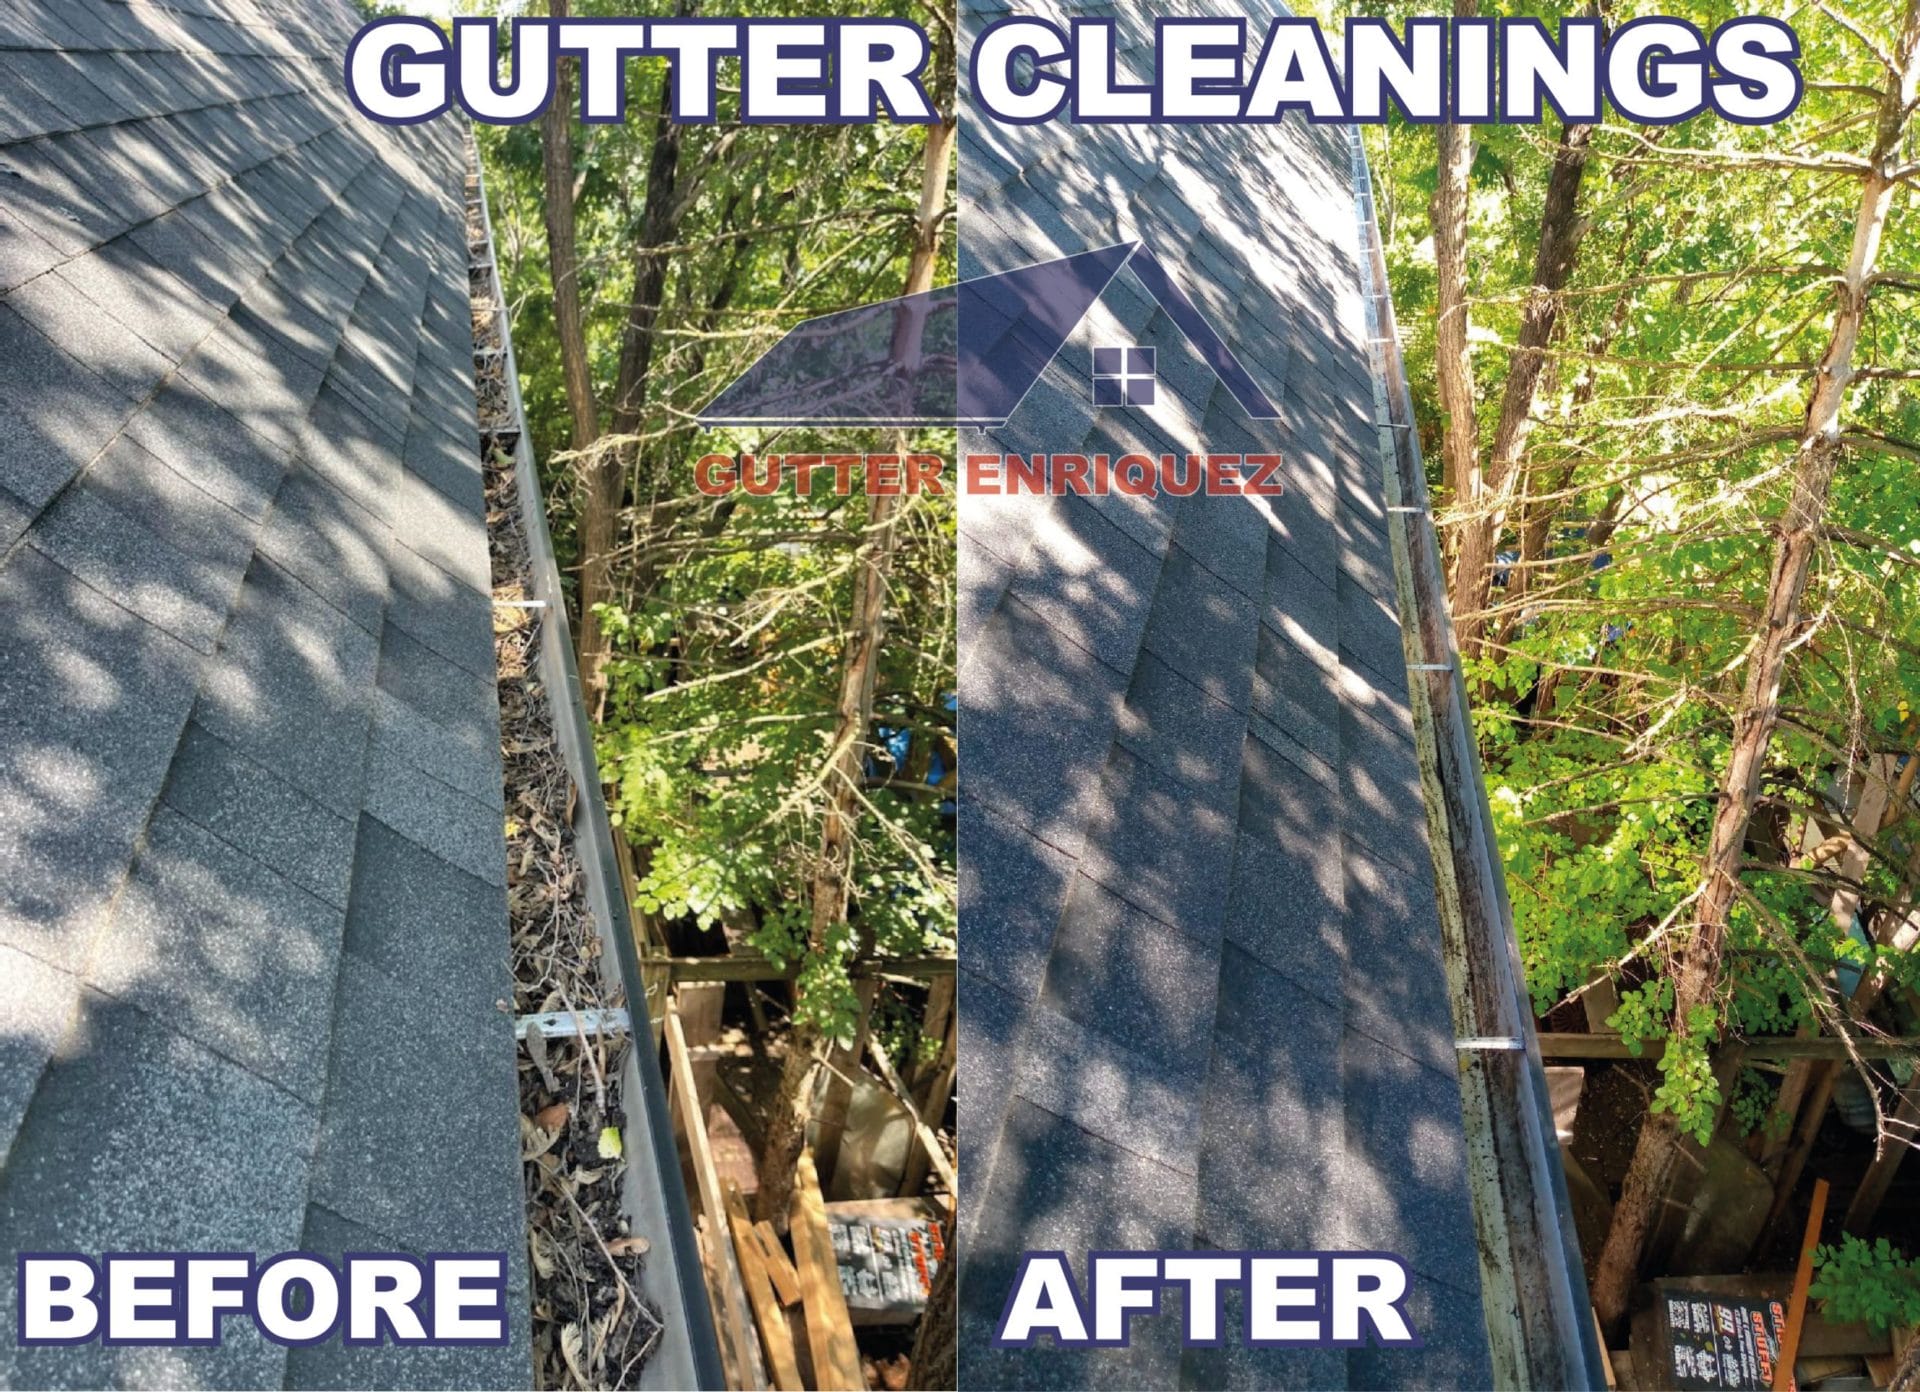 gutter cleaning service chicago Gutter cleaner near me - Best Gutter Cleaning Service in Chicago, IL